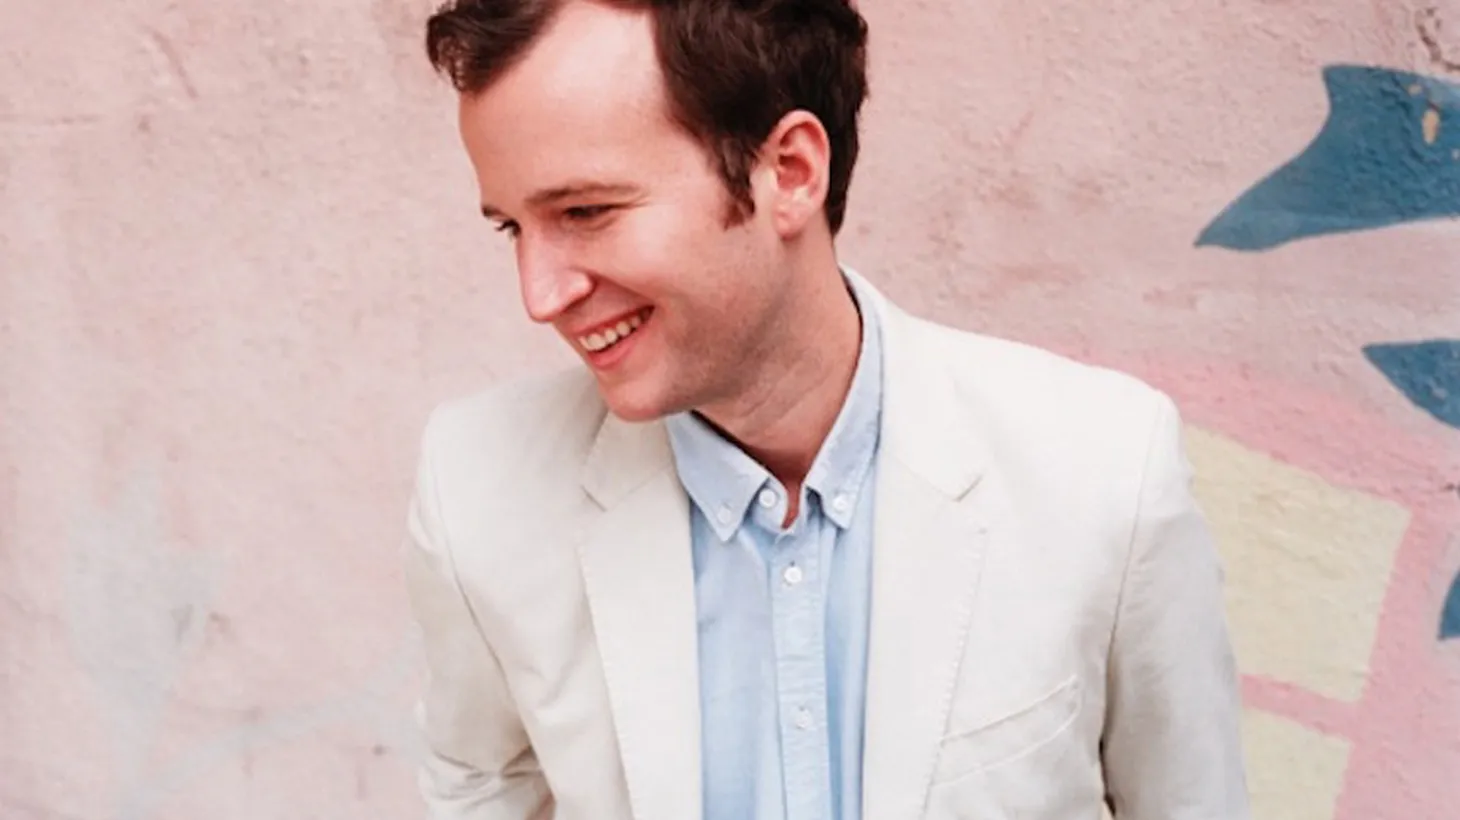 Vampire Weekend bassist Chris Baio is striking out on his own as Baio, with his solo debut full length due this Fall.